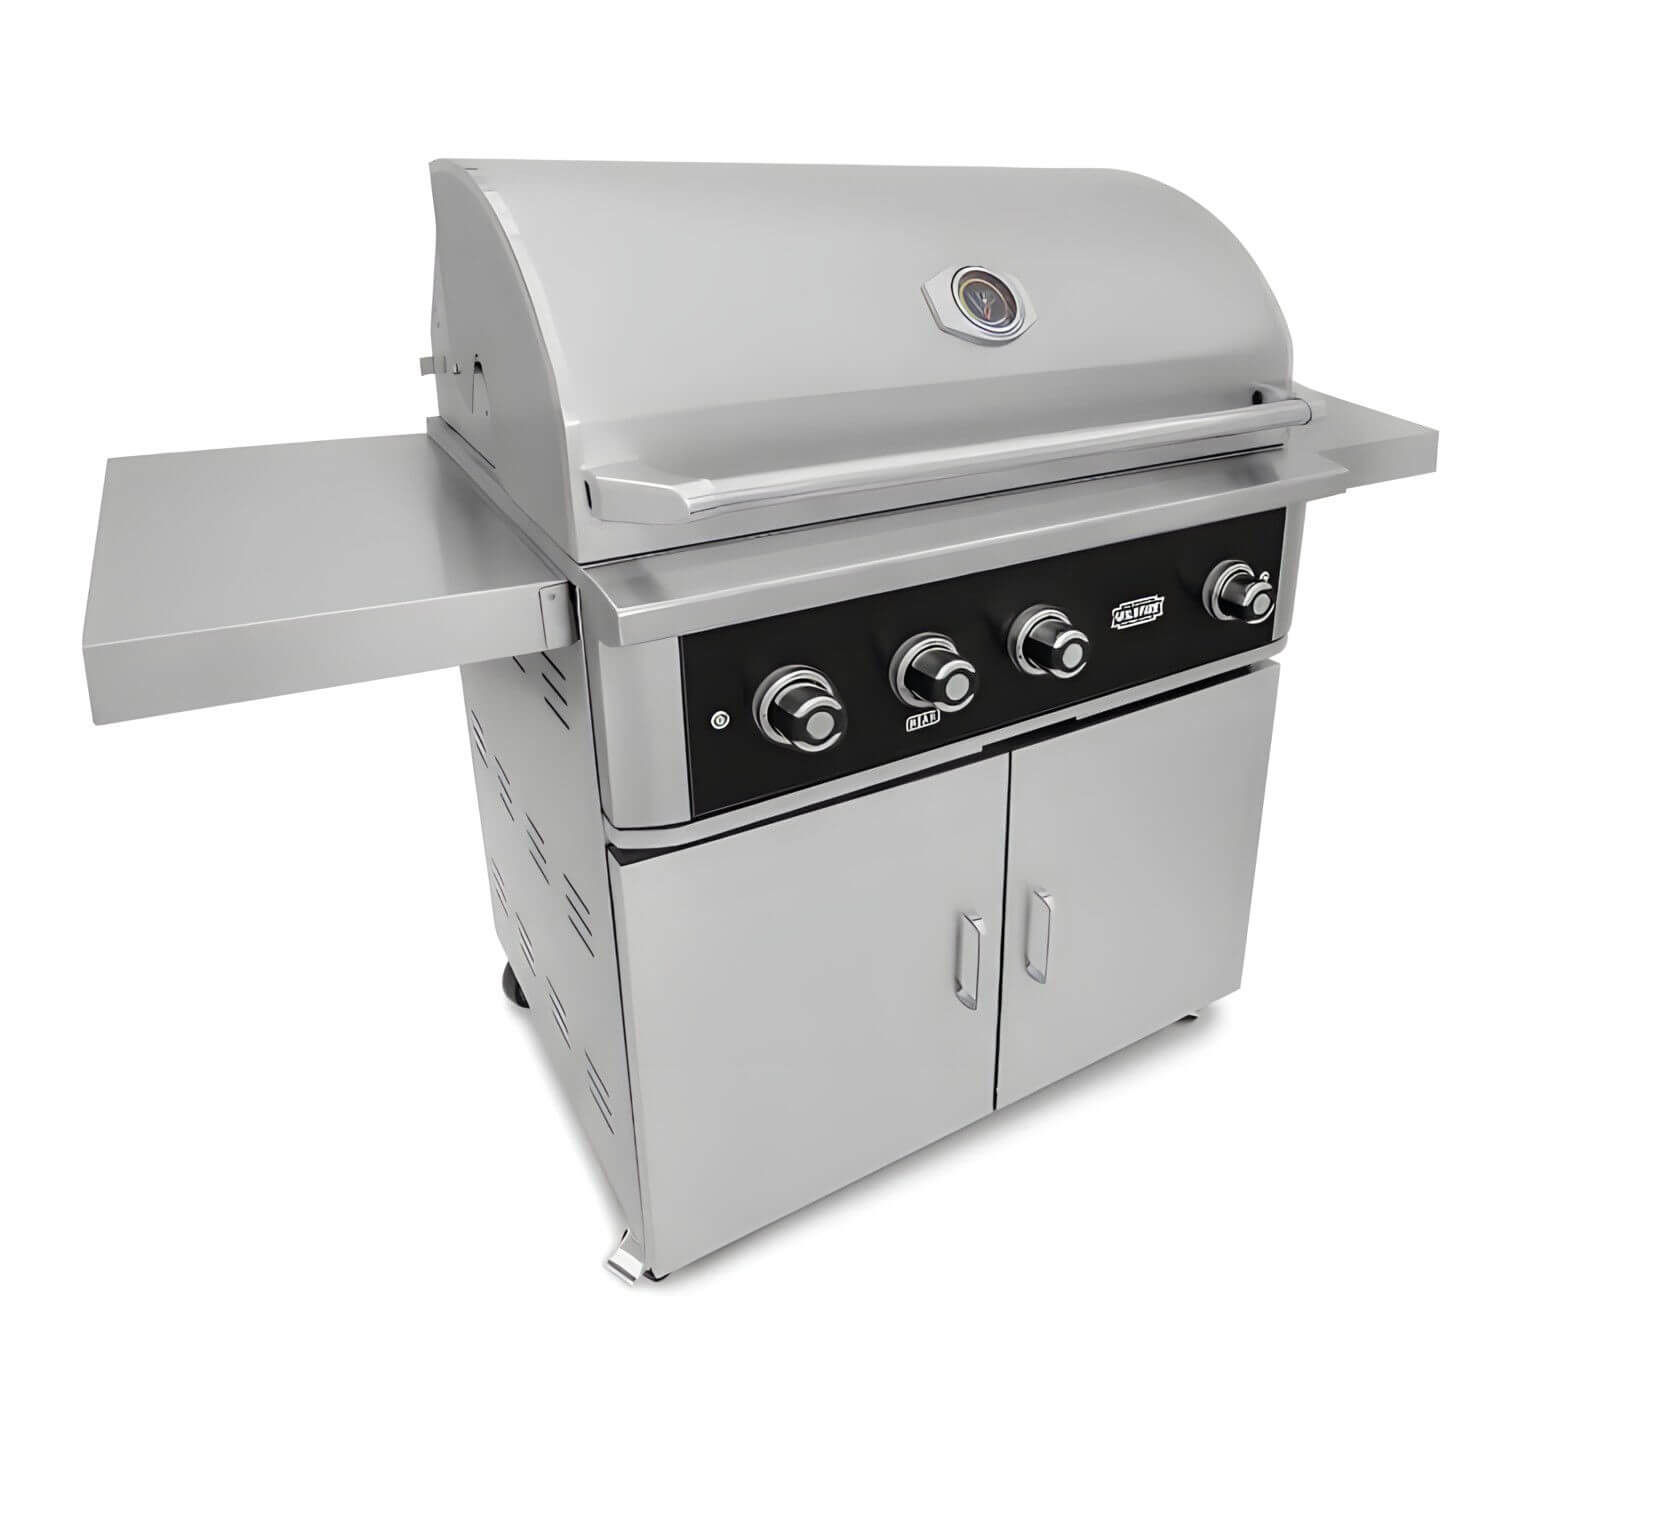 Wildfire Outdoor Living Stainless Steel 36 Inch Grill Cart w/ Double Doors